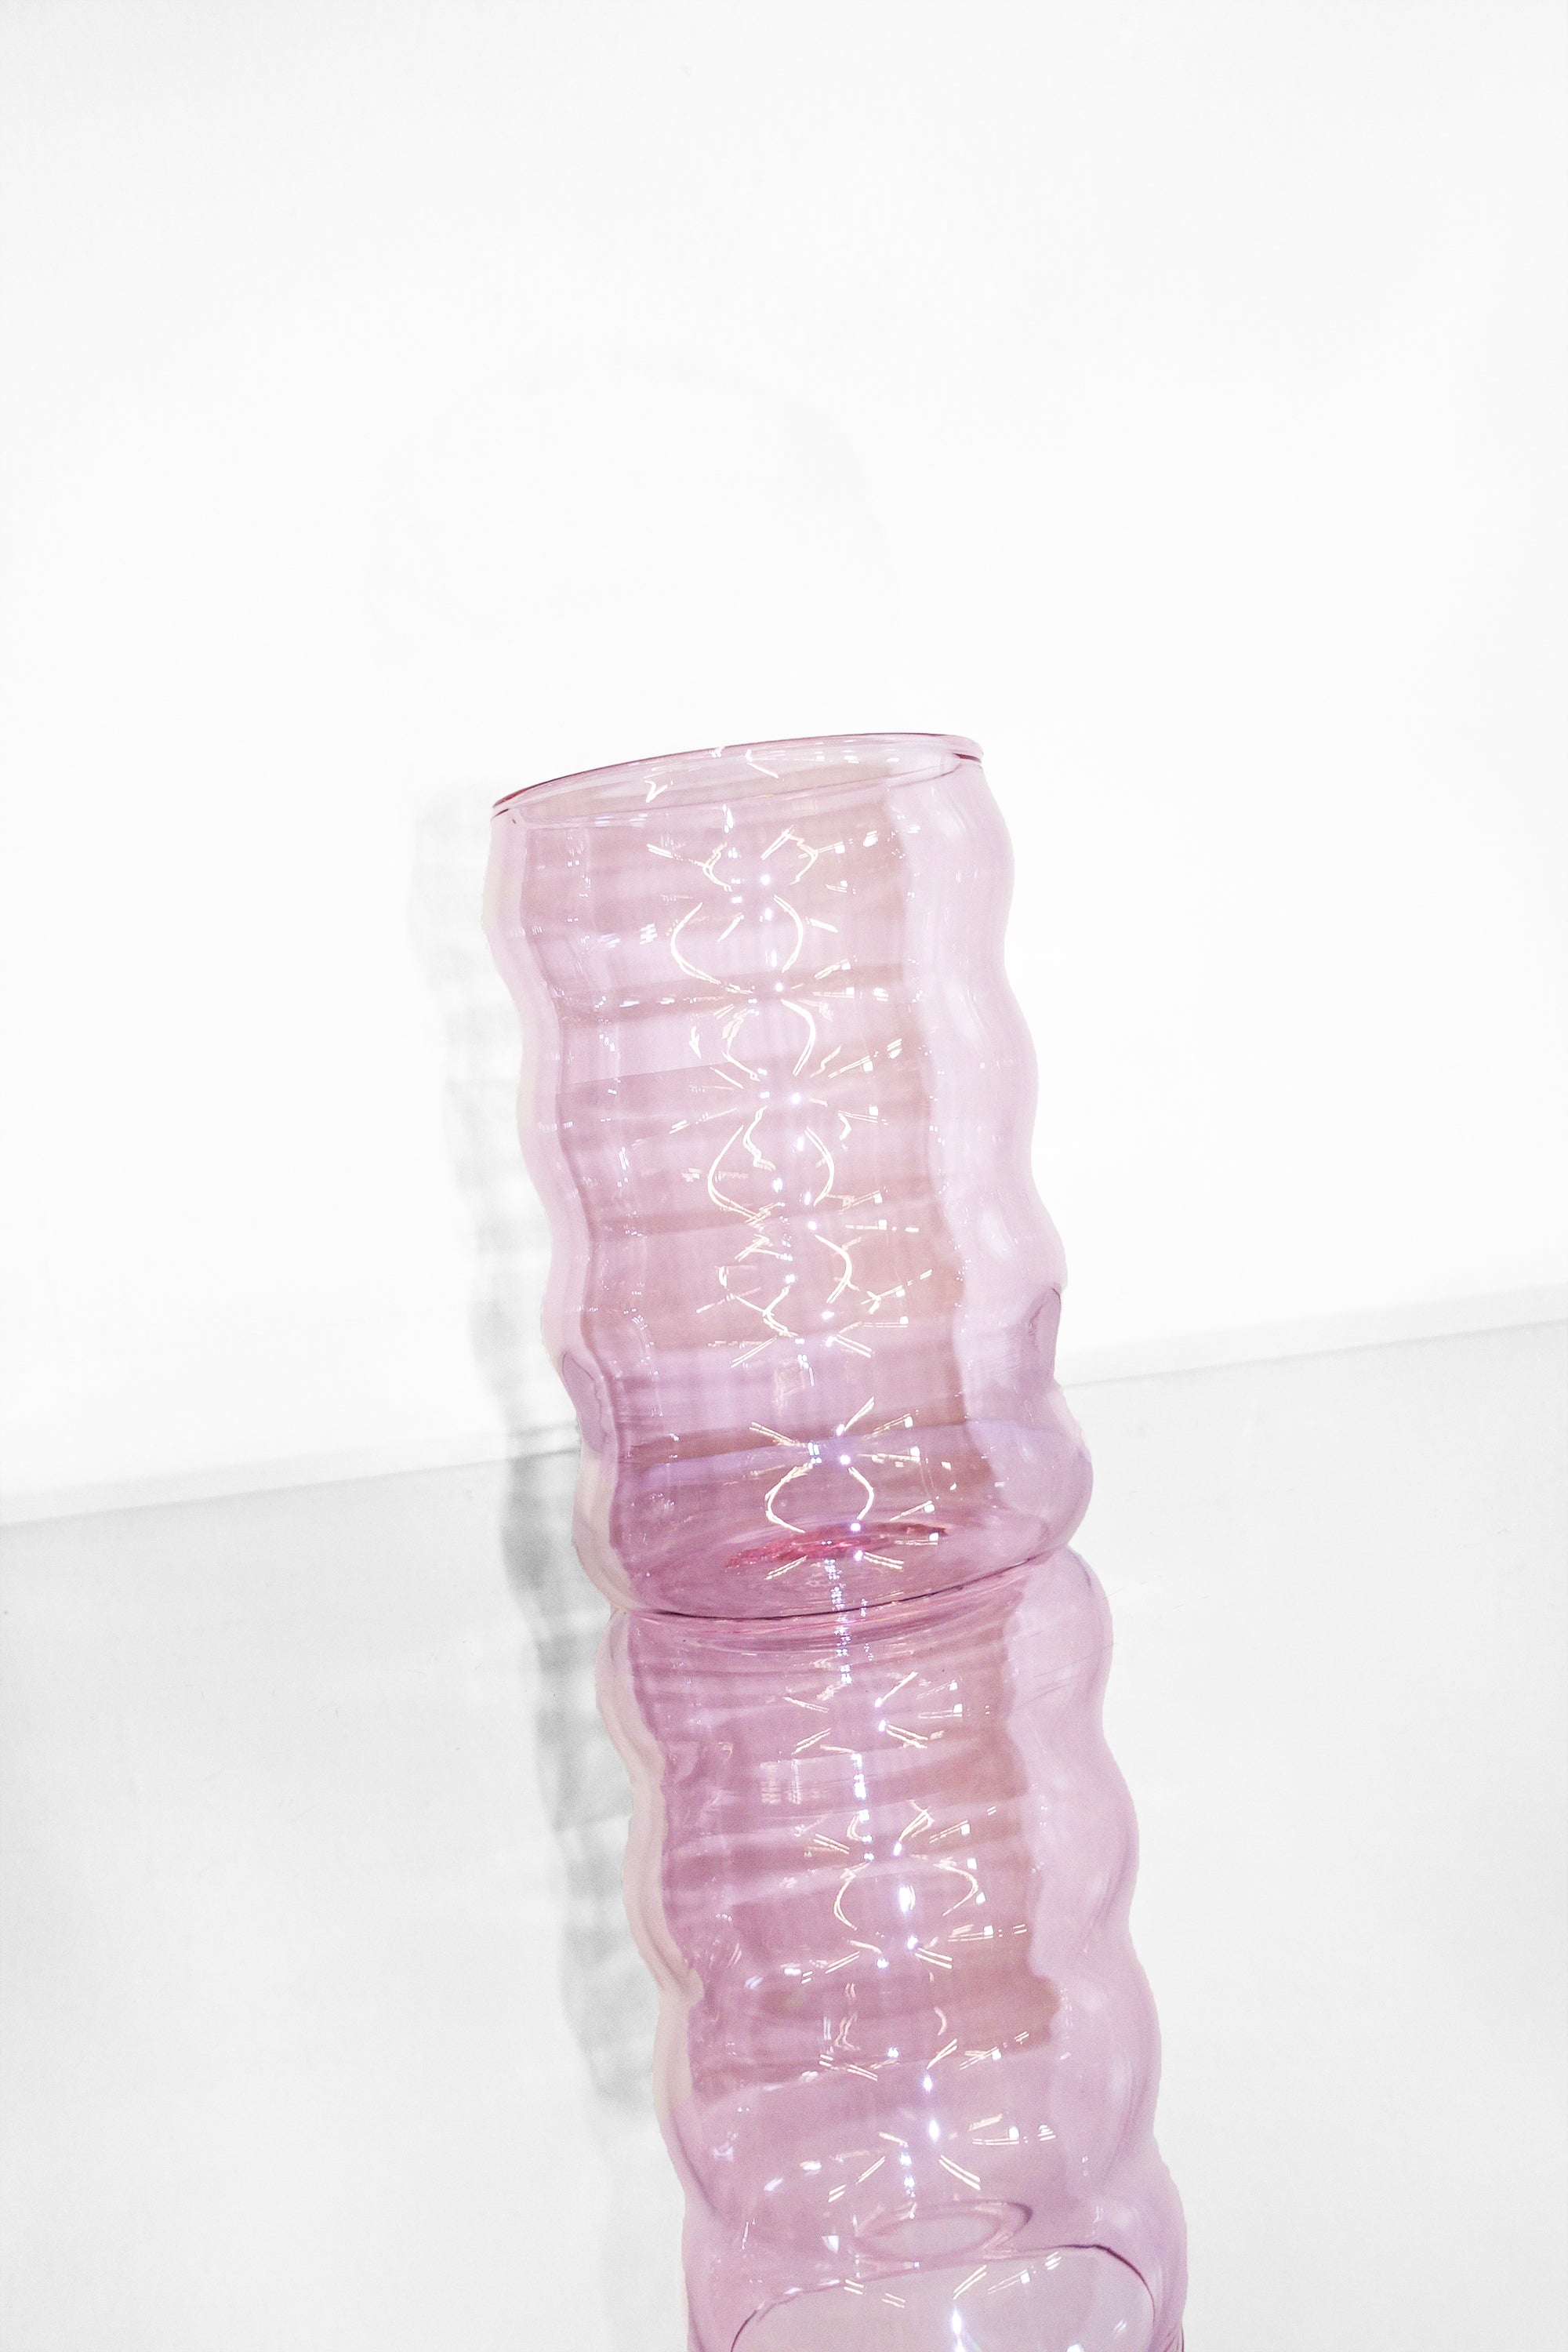 Ripple Cup in 12oz Pink by Sophie Lou Jacobsen